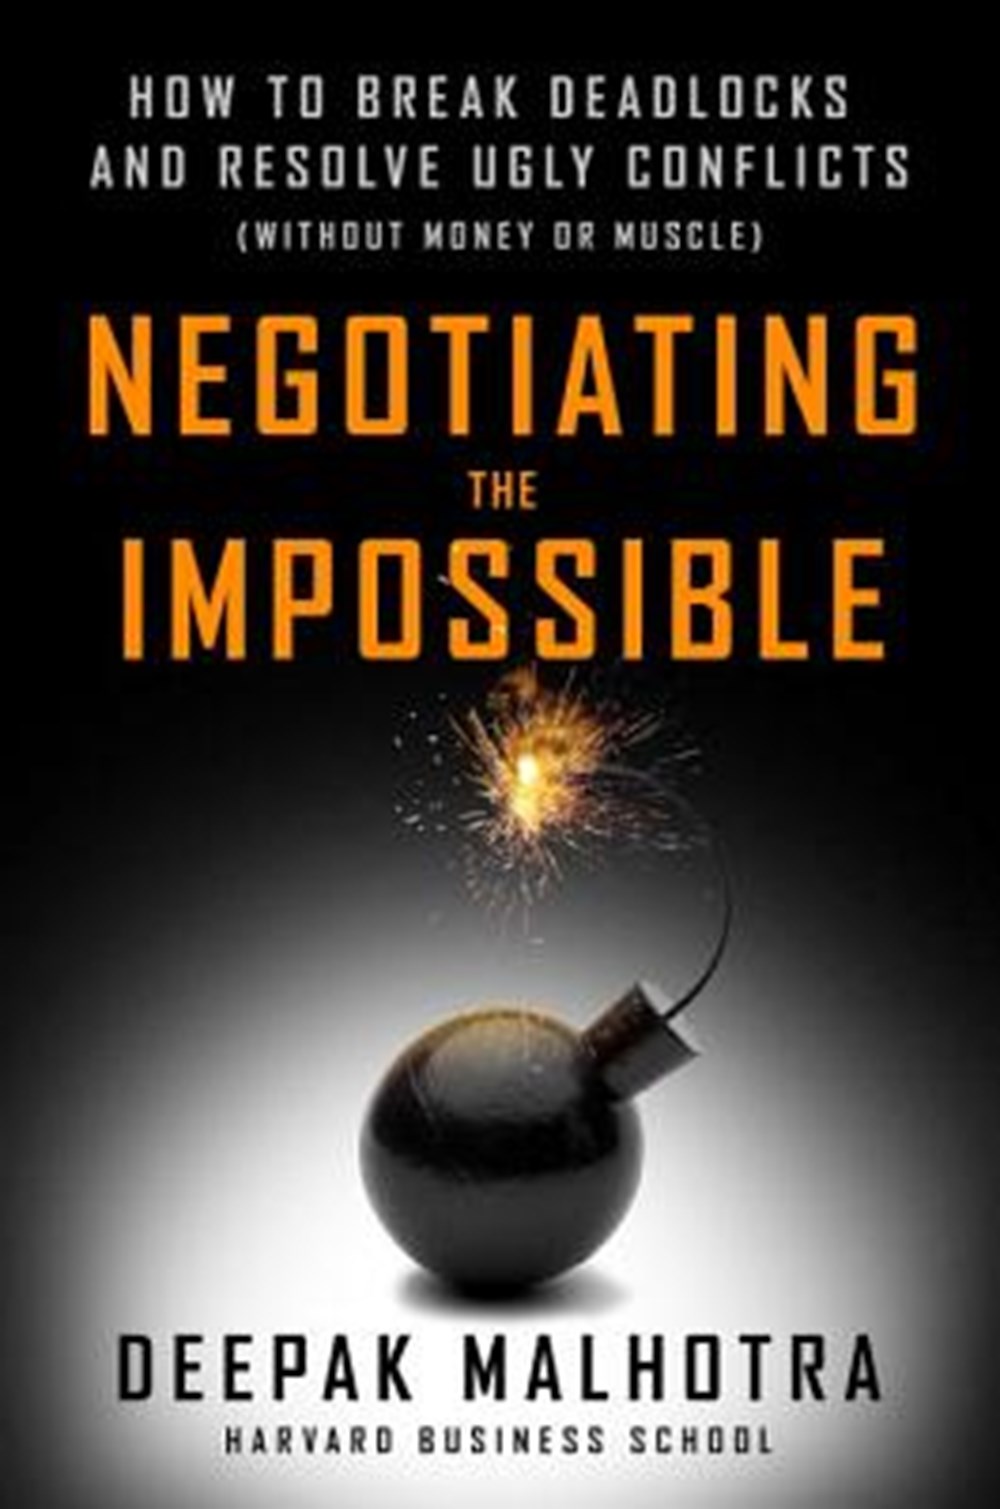 Negotiating the Impossible How to Break Deadlocks and Resolve Ugly Conflicts (Without Money or Muscl